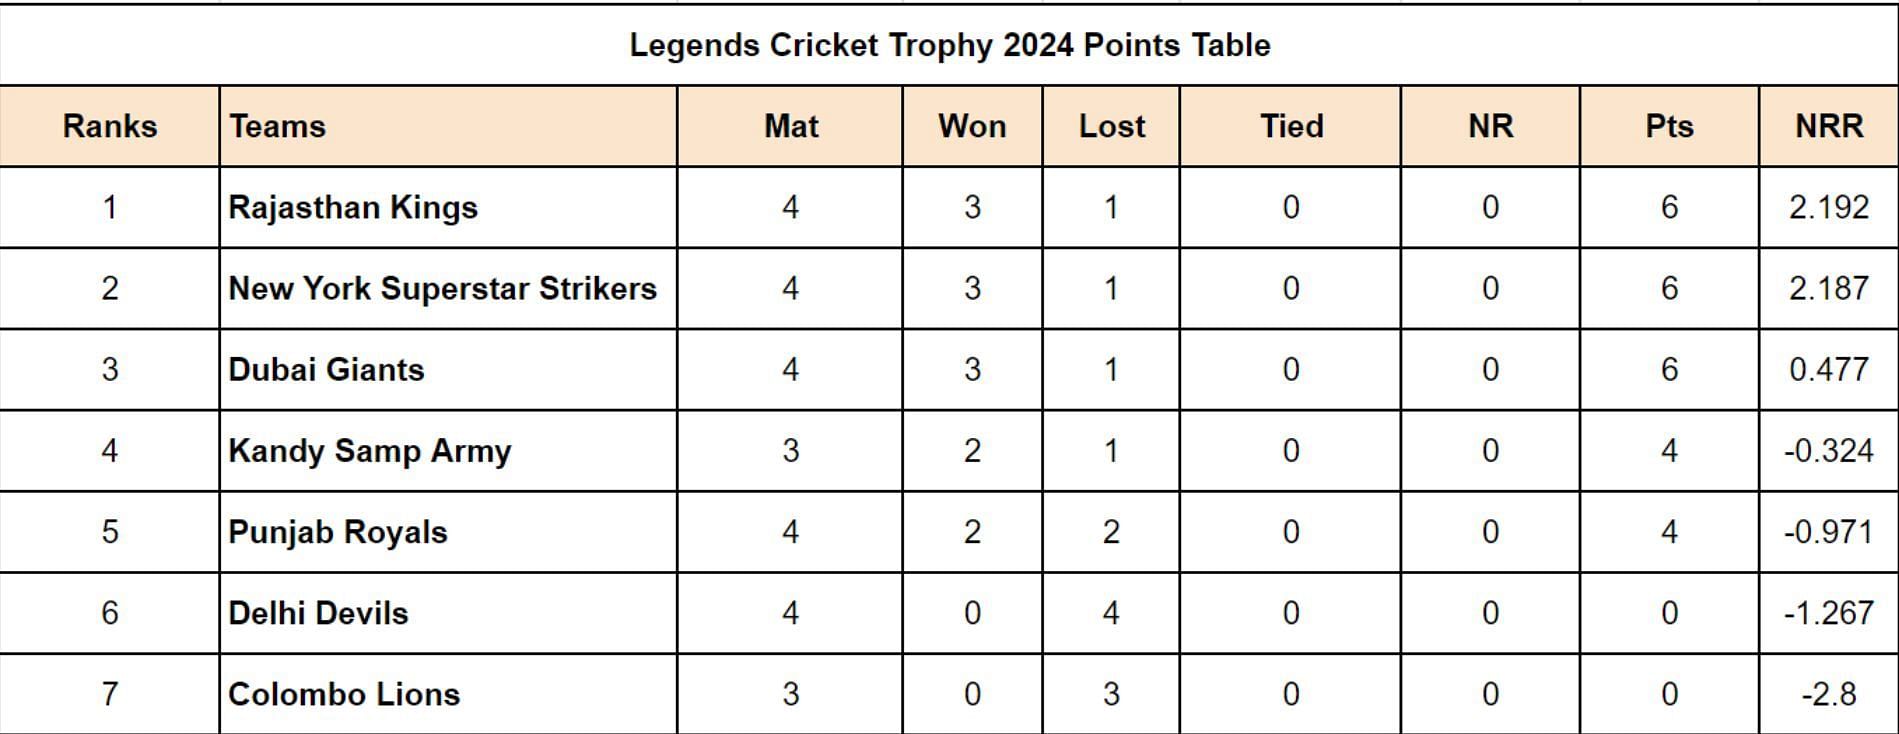 Legends Cricket Trophy 2024 Points Table Updated after Match 13